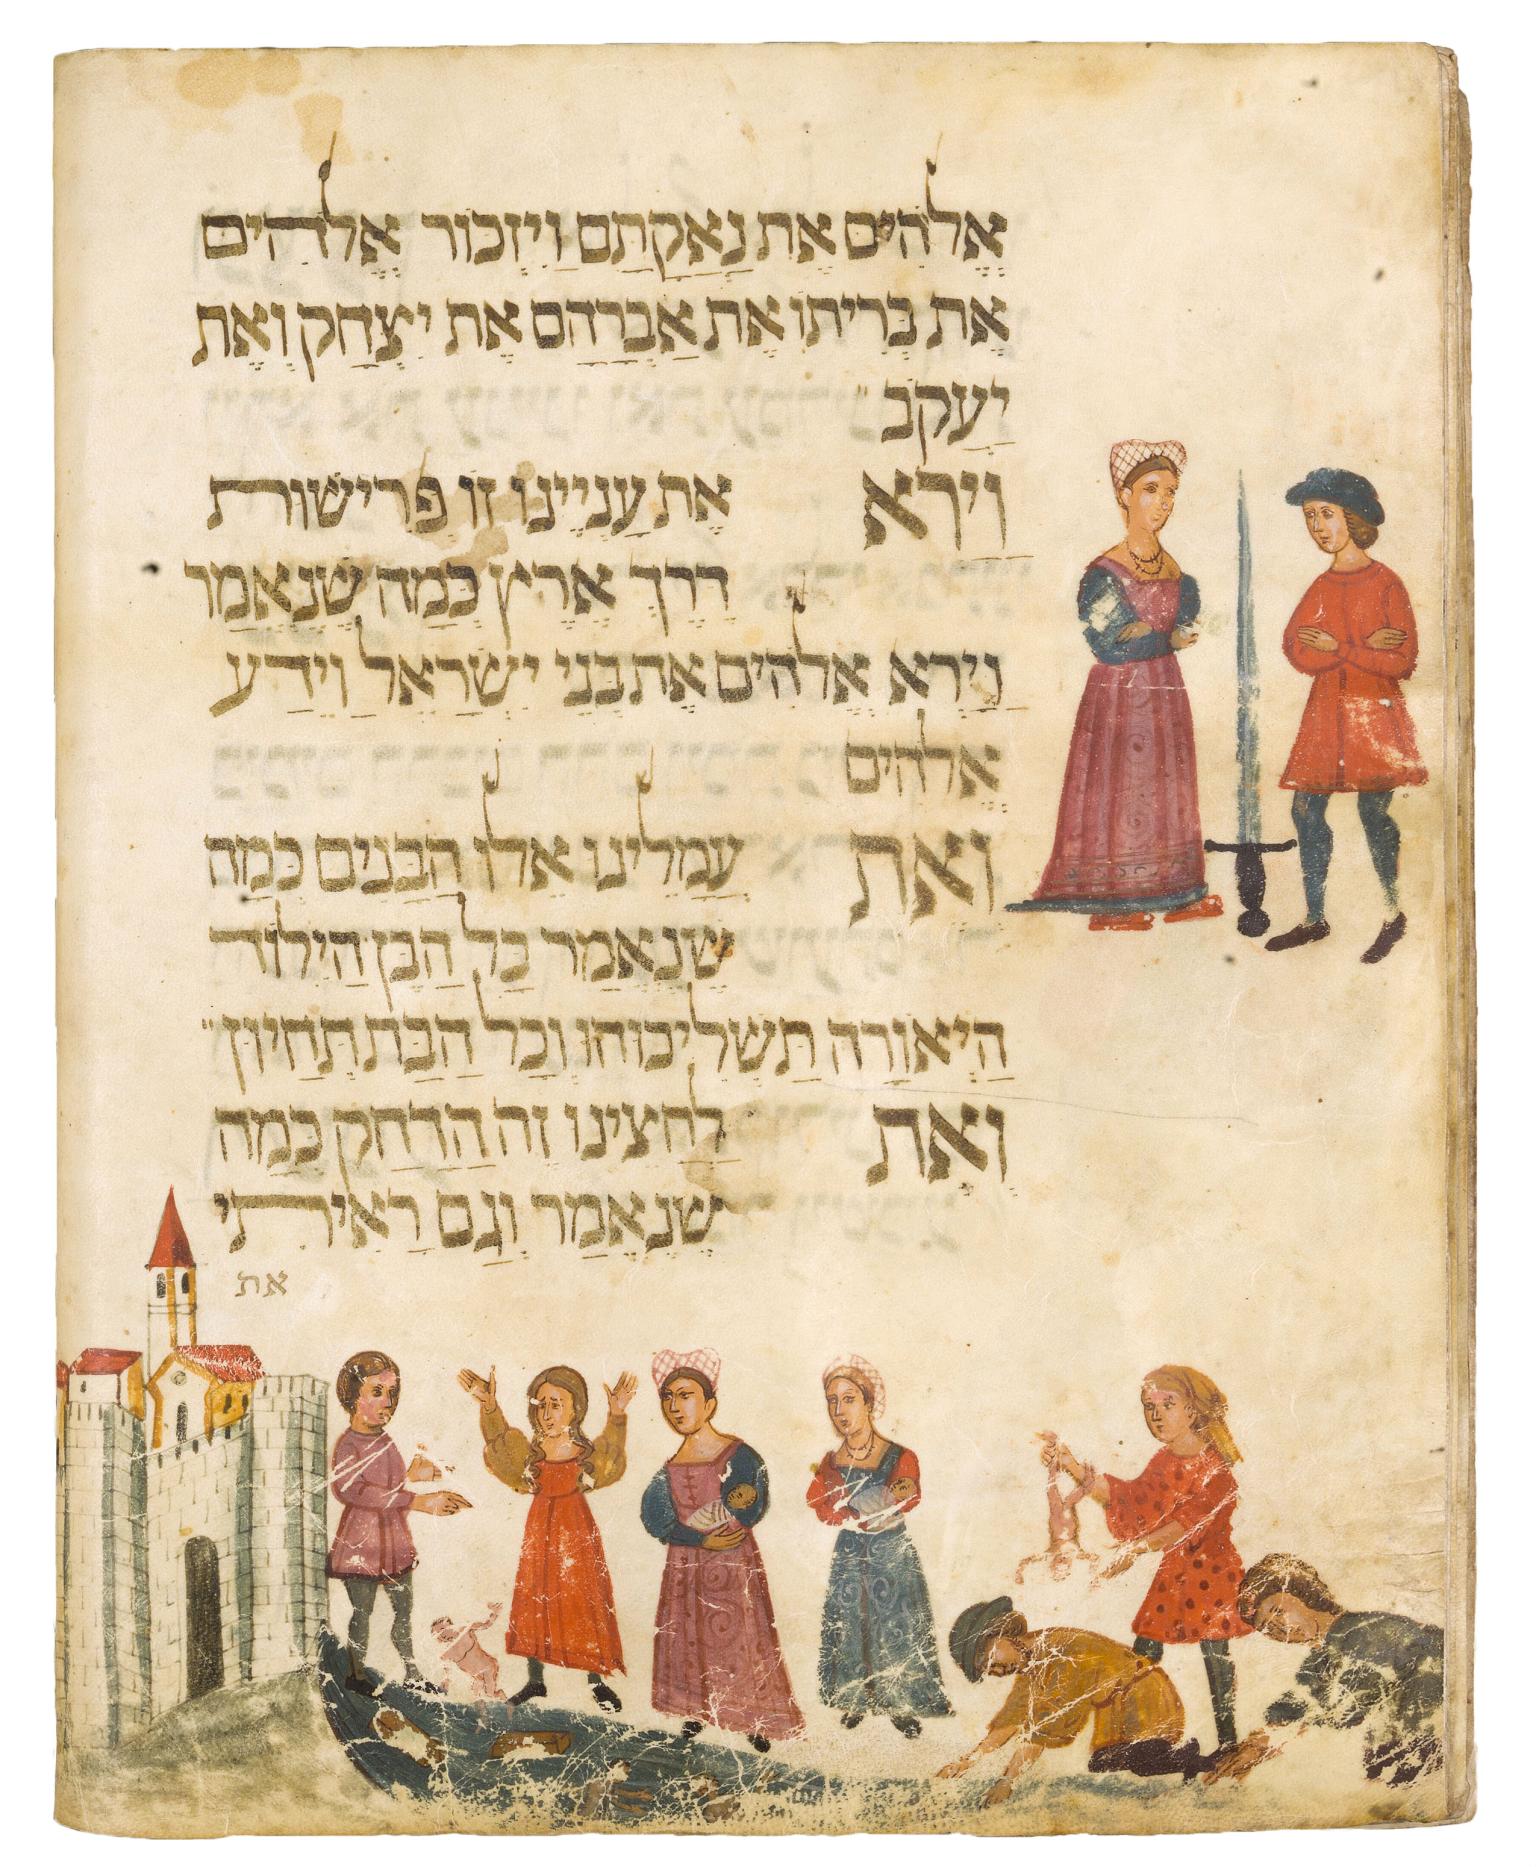 Manuscript page with Hebrew text of illustrations of figures outside a castle on bottom and a man and woman separated by sword on the right.